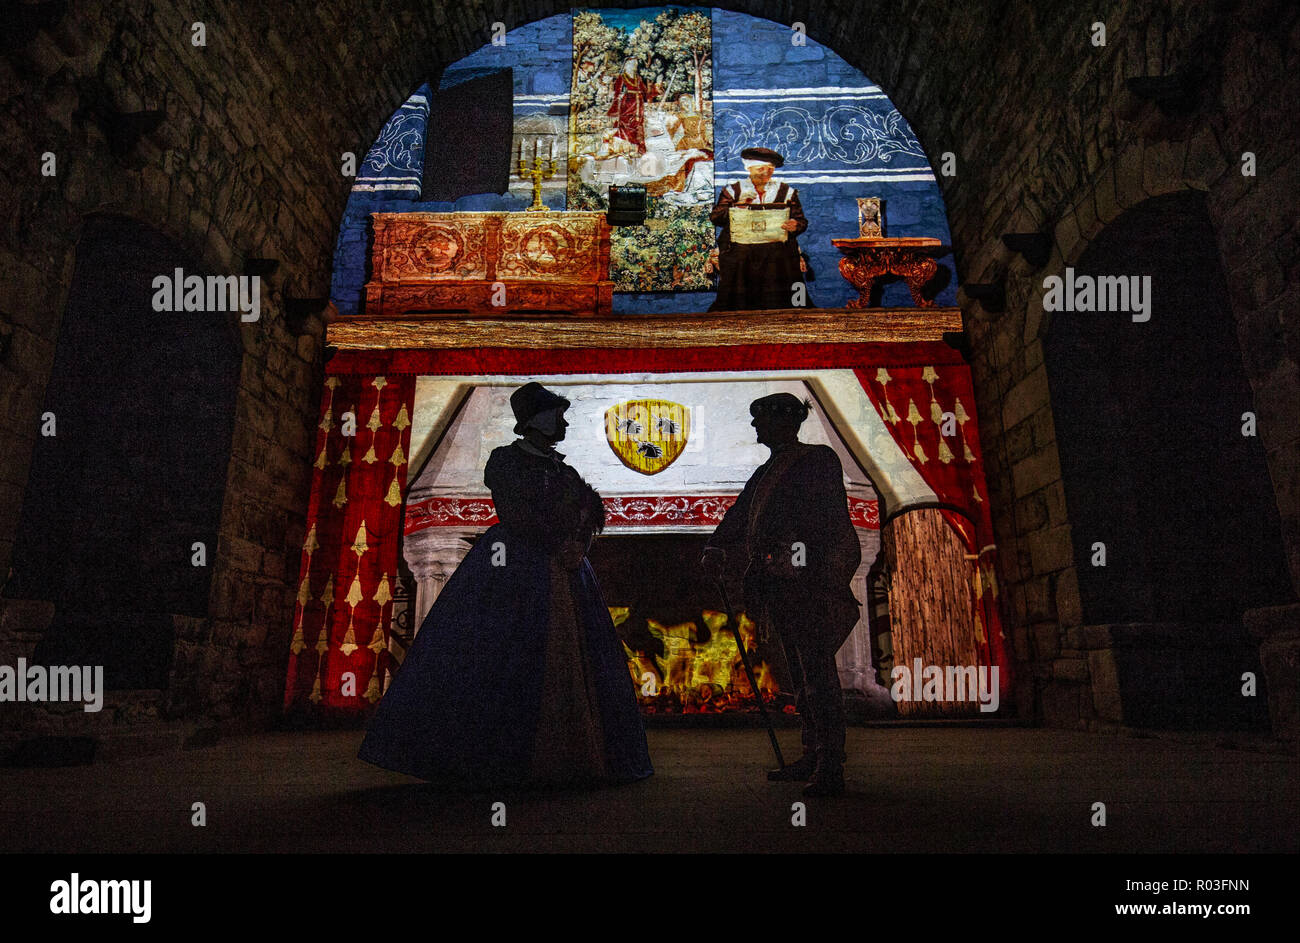 Clara Koenig and Colin Carr, from Living History Scotland, get into character at Craigmillar Castle on the outskirts of Edinburgh which is lit up with light projections and vivid recreations to form part of the Spotlight on Mary after-dark event which tells the story of the Craigmillar Bond; the plot by Mary Queen of Scots nobles to get rid of her husband, Darnley. Stock Photo